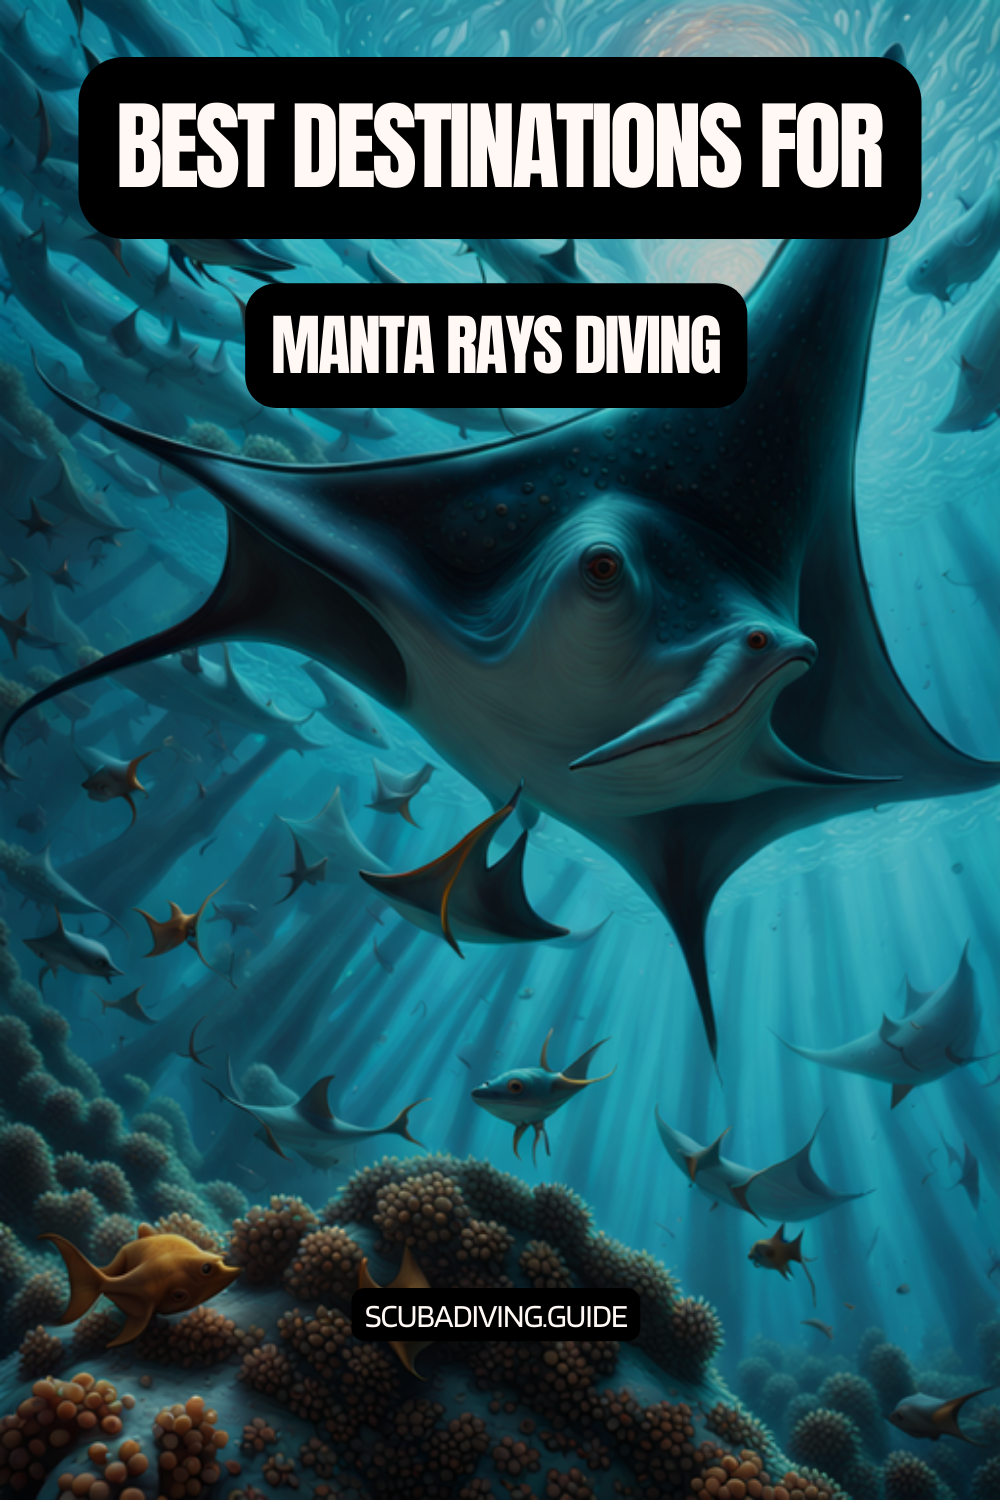 Best Destinations for Diving with Manta Rays